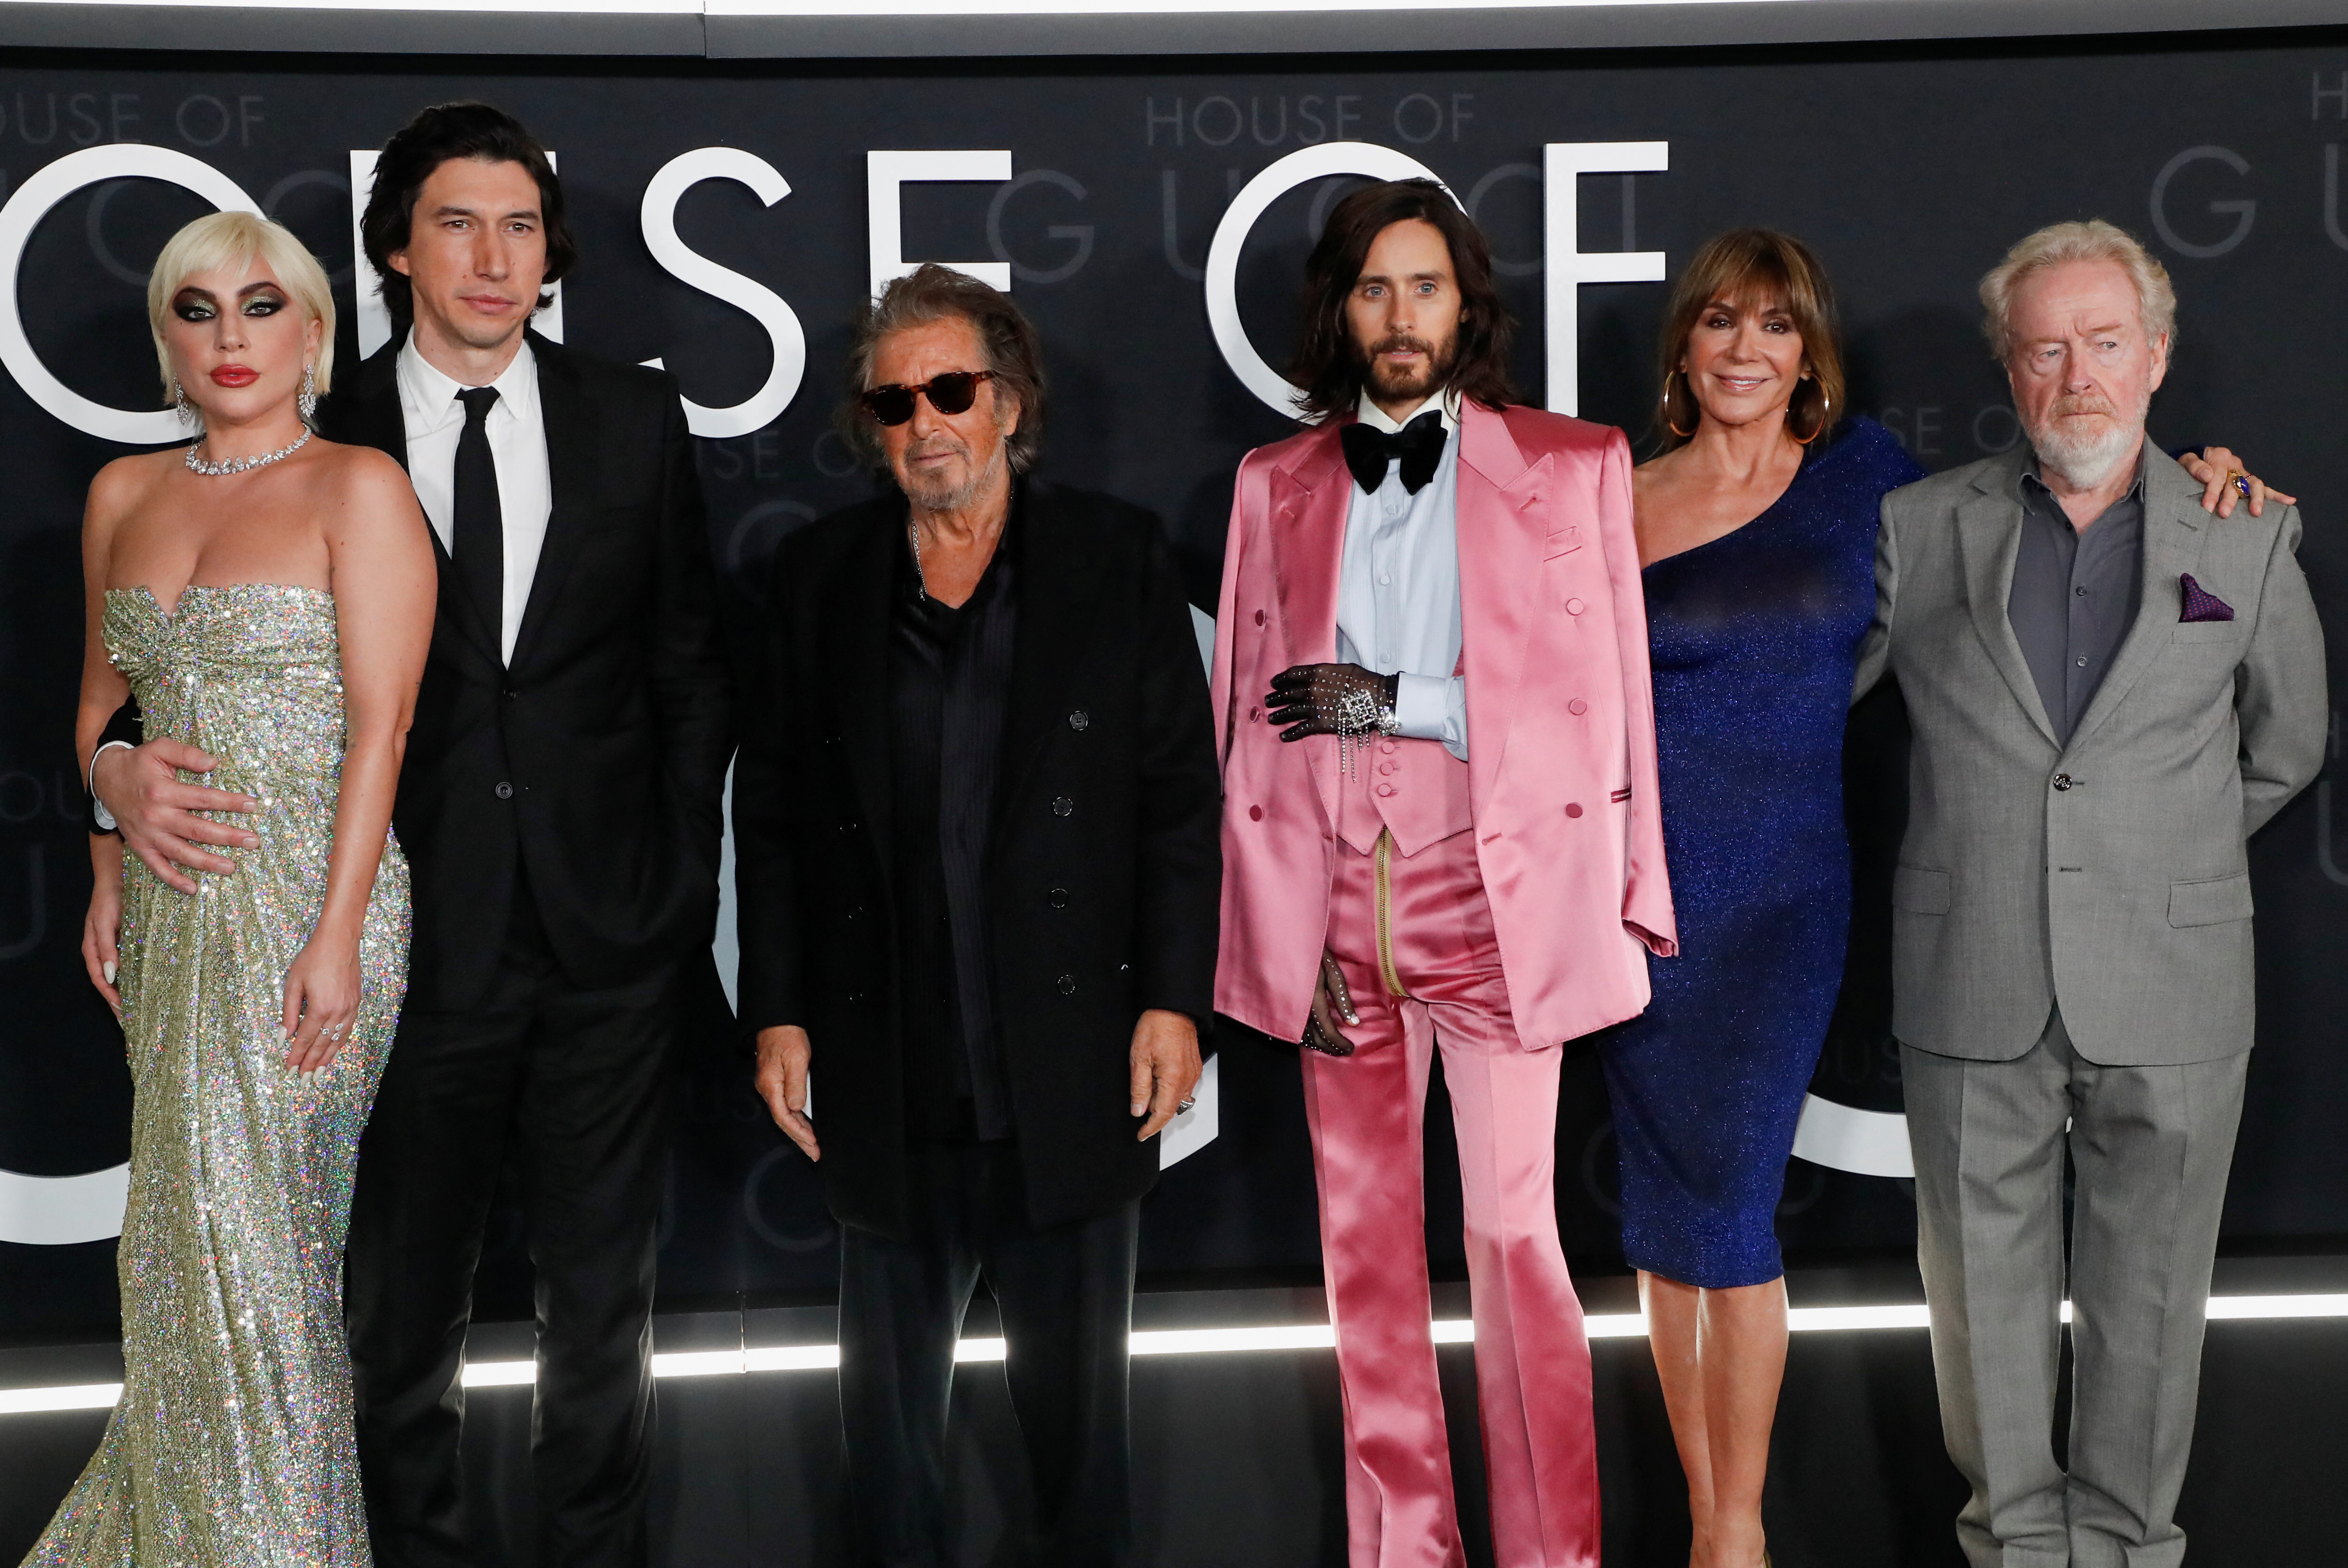 Cast members Lady Gaga, Adam Driver, Al Pacino and Jared Leto pose with director Ridley Scott and his wife, producer Giannina Facio during the premiere of the film 